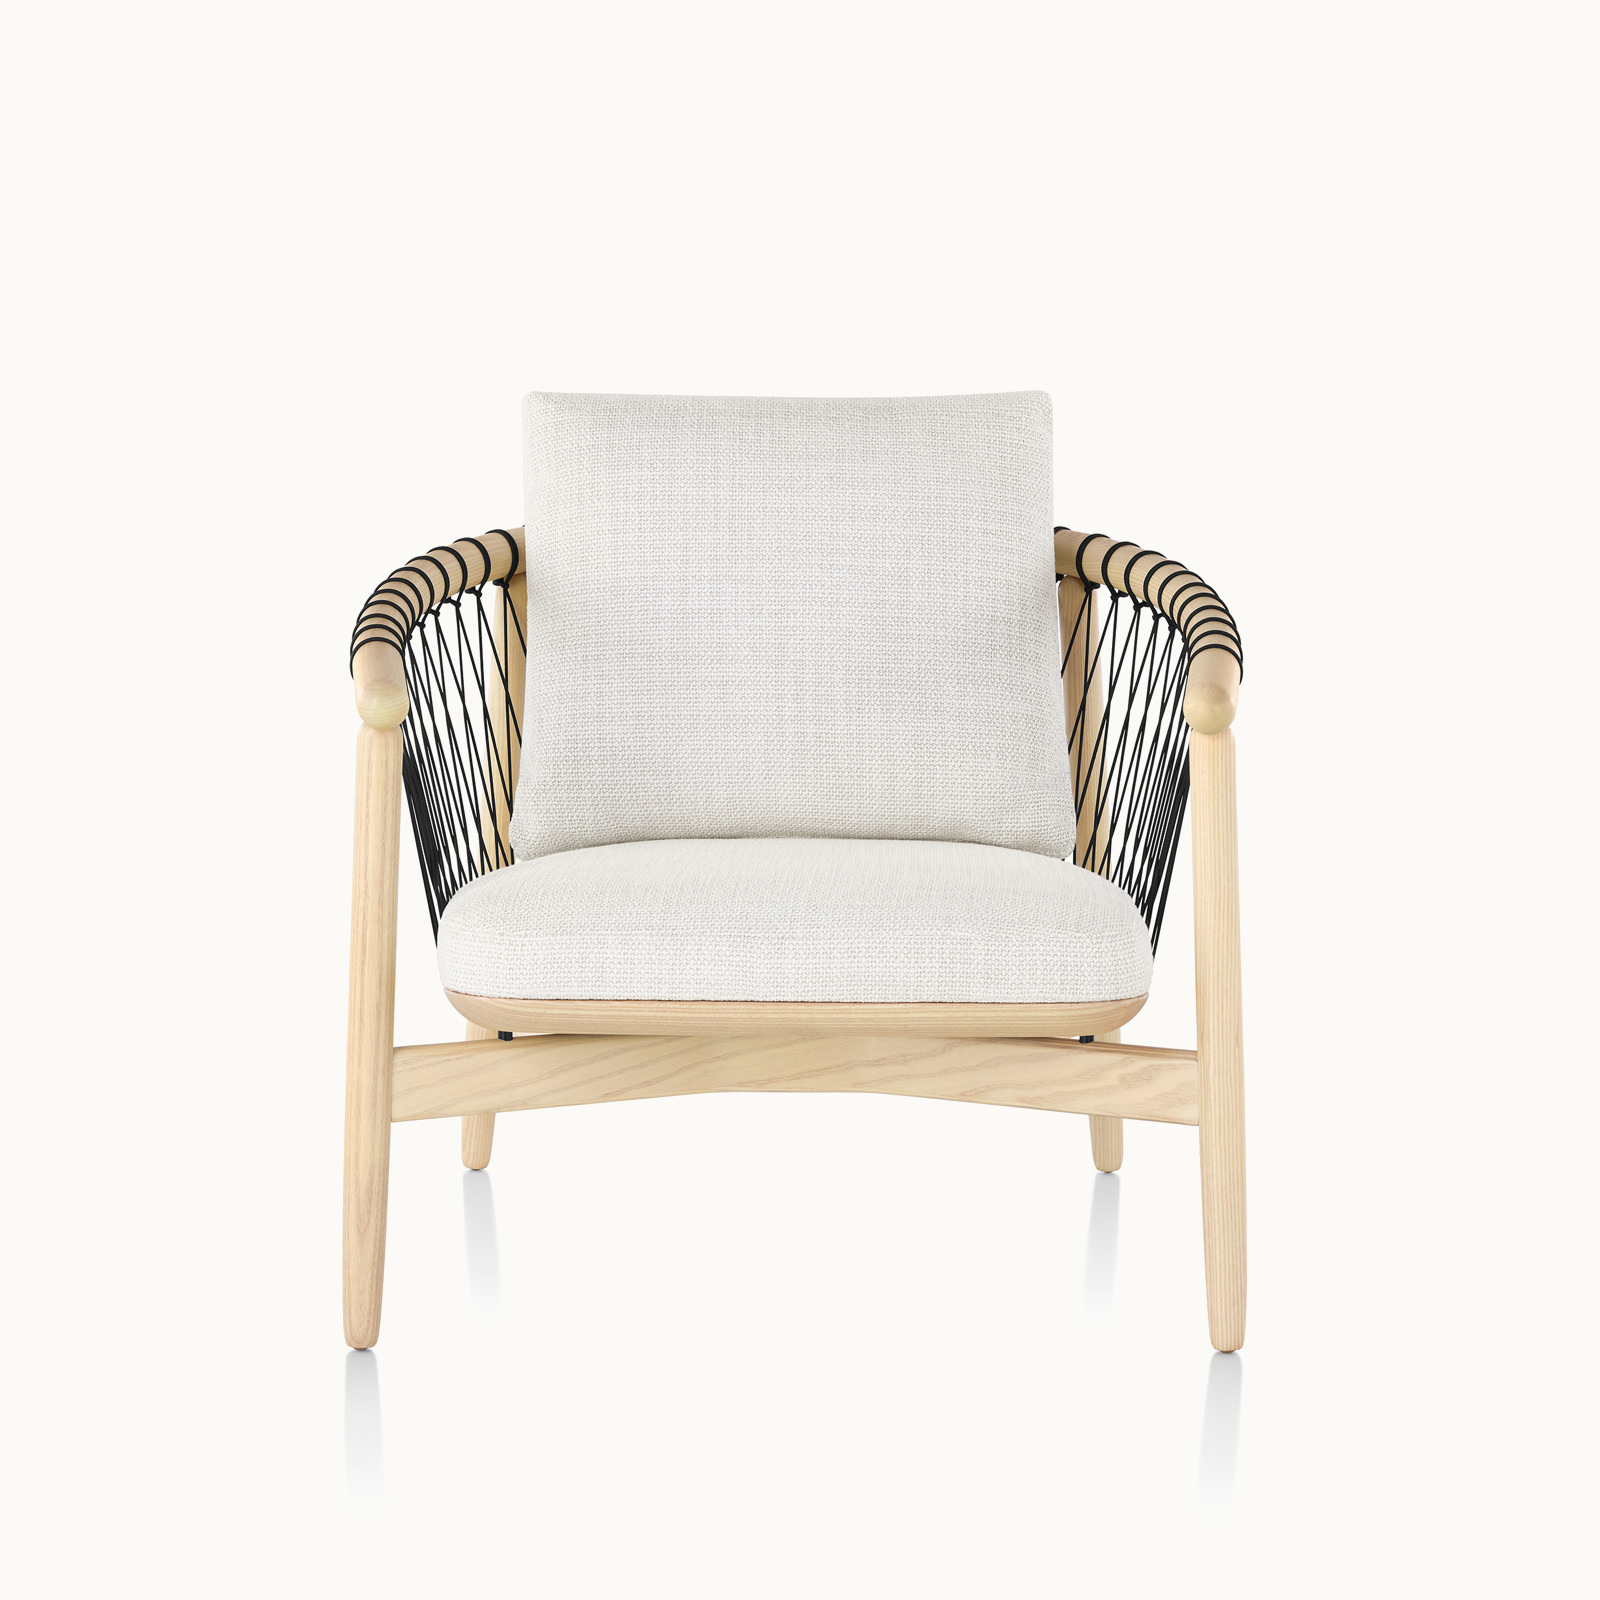 A Crosshatch lounge chair with off-white fabric and a light wood frame, viewed from the front.